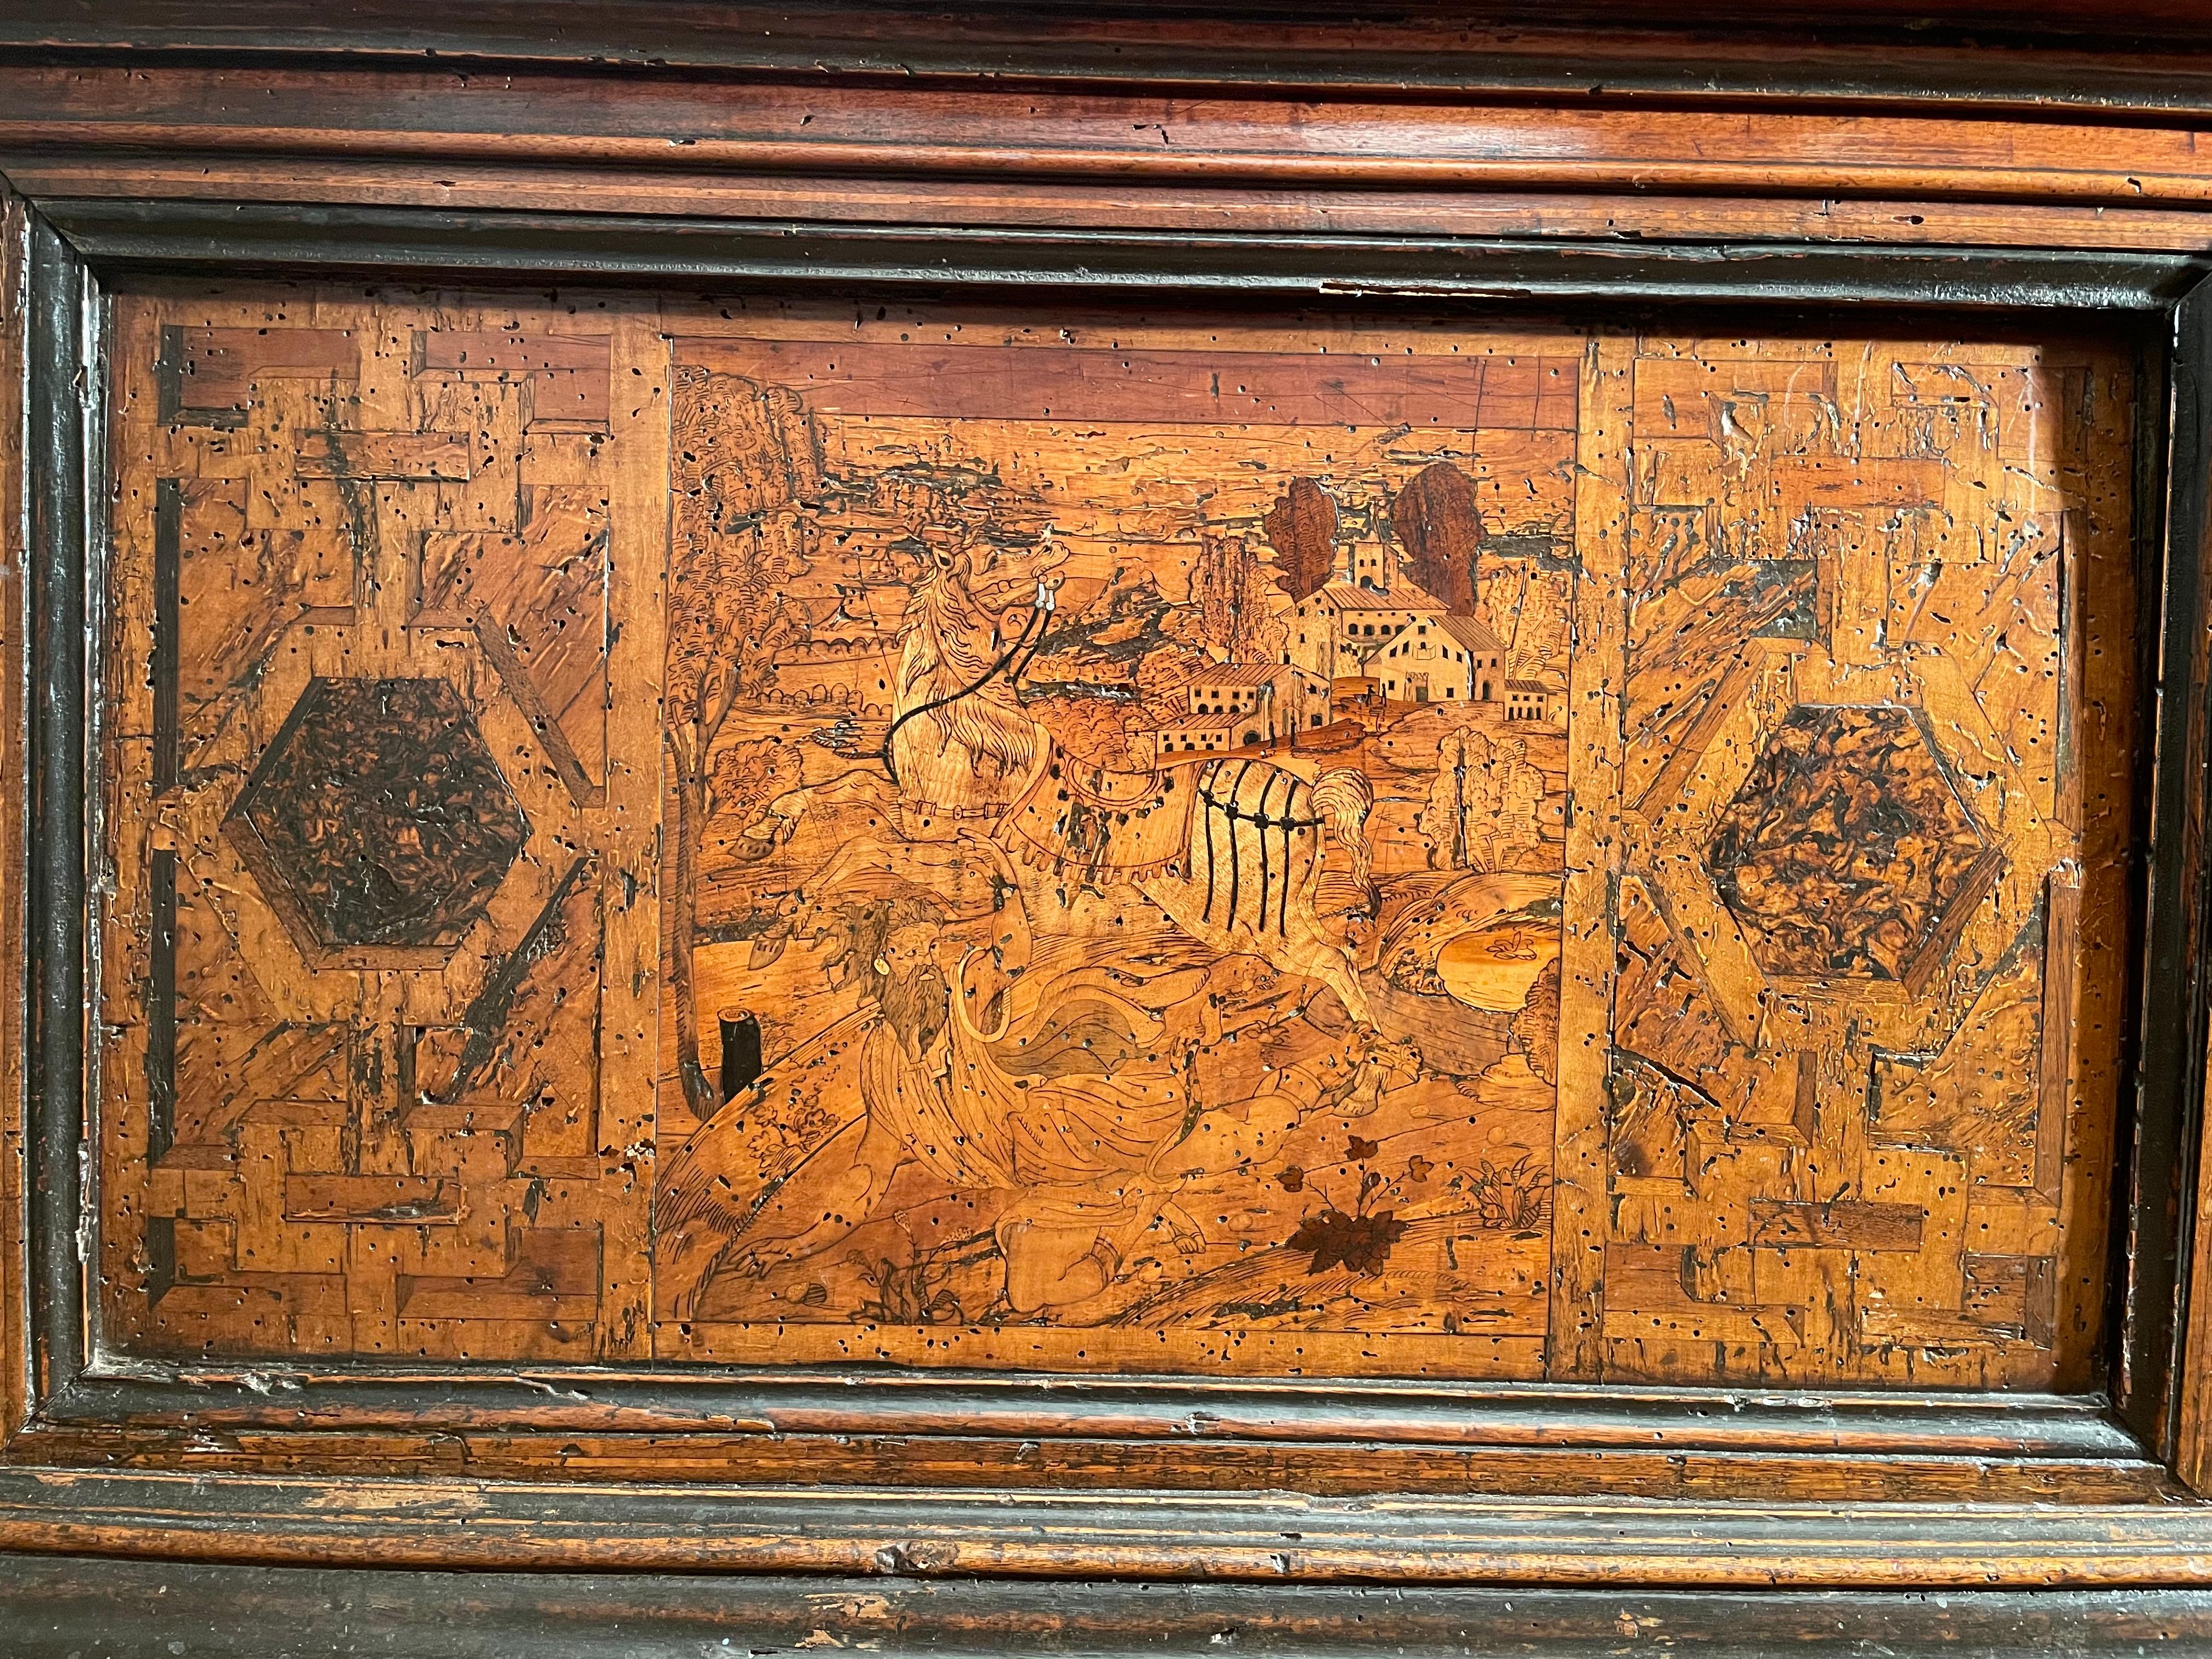 This cassone inlaid fruit wood on a walnut background, has a very beautiful decoration with geometric patterns and foliage scrolls. On the facade, two hagiographic scenes represent the conversions of Saint Paul on the left and Saint Hubert on the